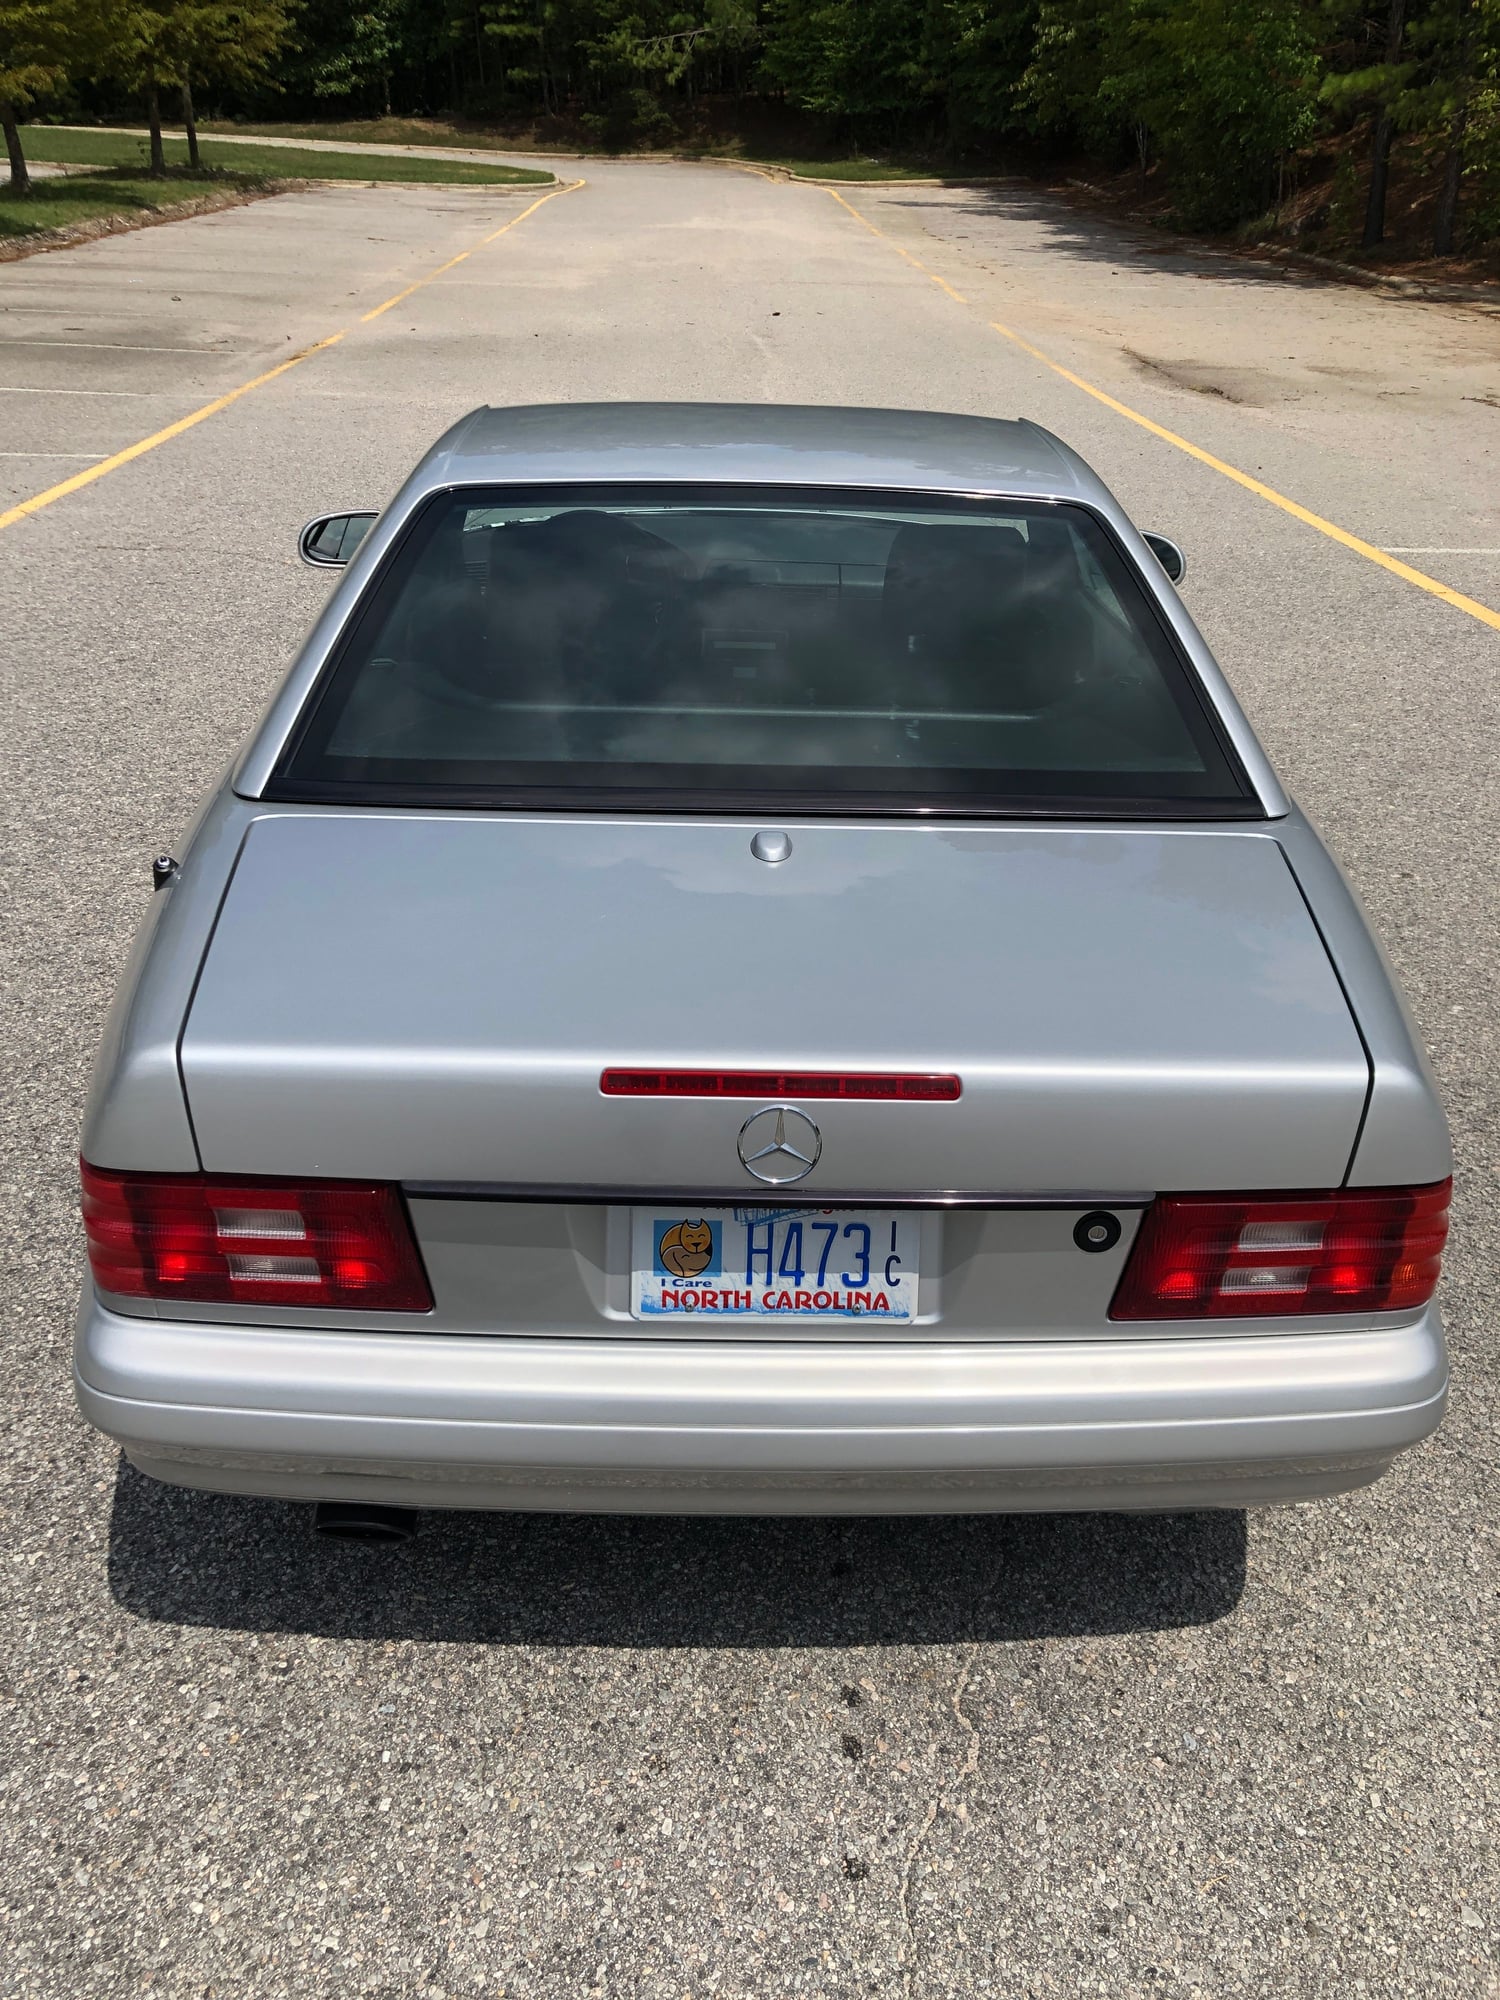 2000 Mercedes-Benz SL500 - 2000 SL500 46k miles 14,500 - Used - VIN WDBFA68FXYF195244 - 46,000 Miles - 8 cyl - 2WD - Automatic - Convertible - Silver - Carrboro, NC 27510, United States